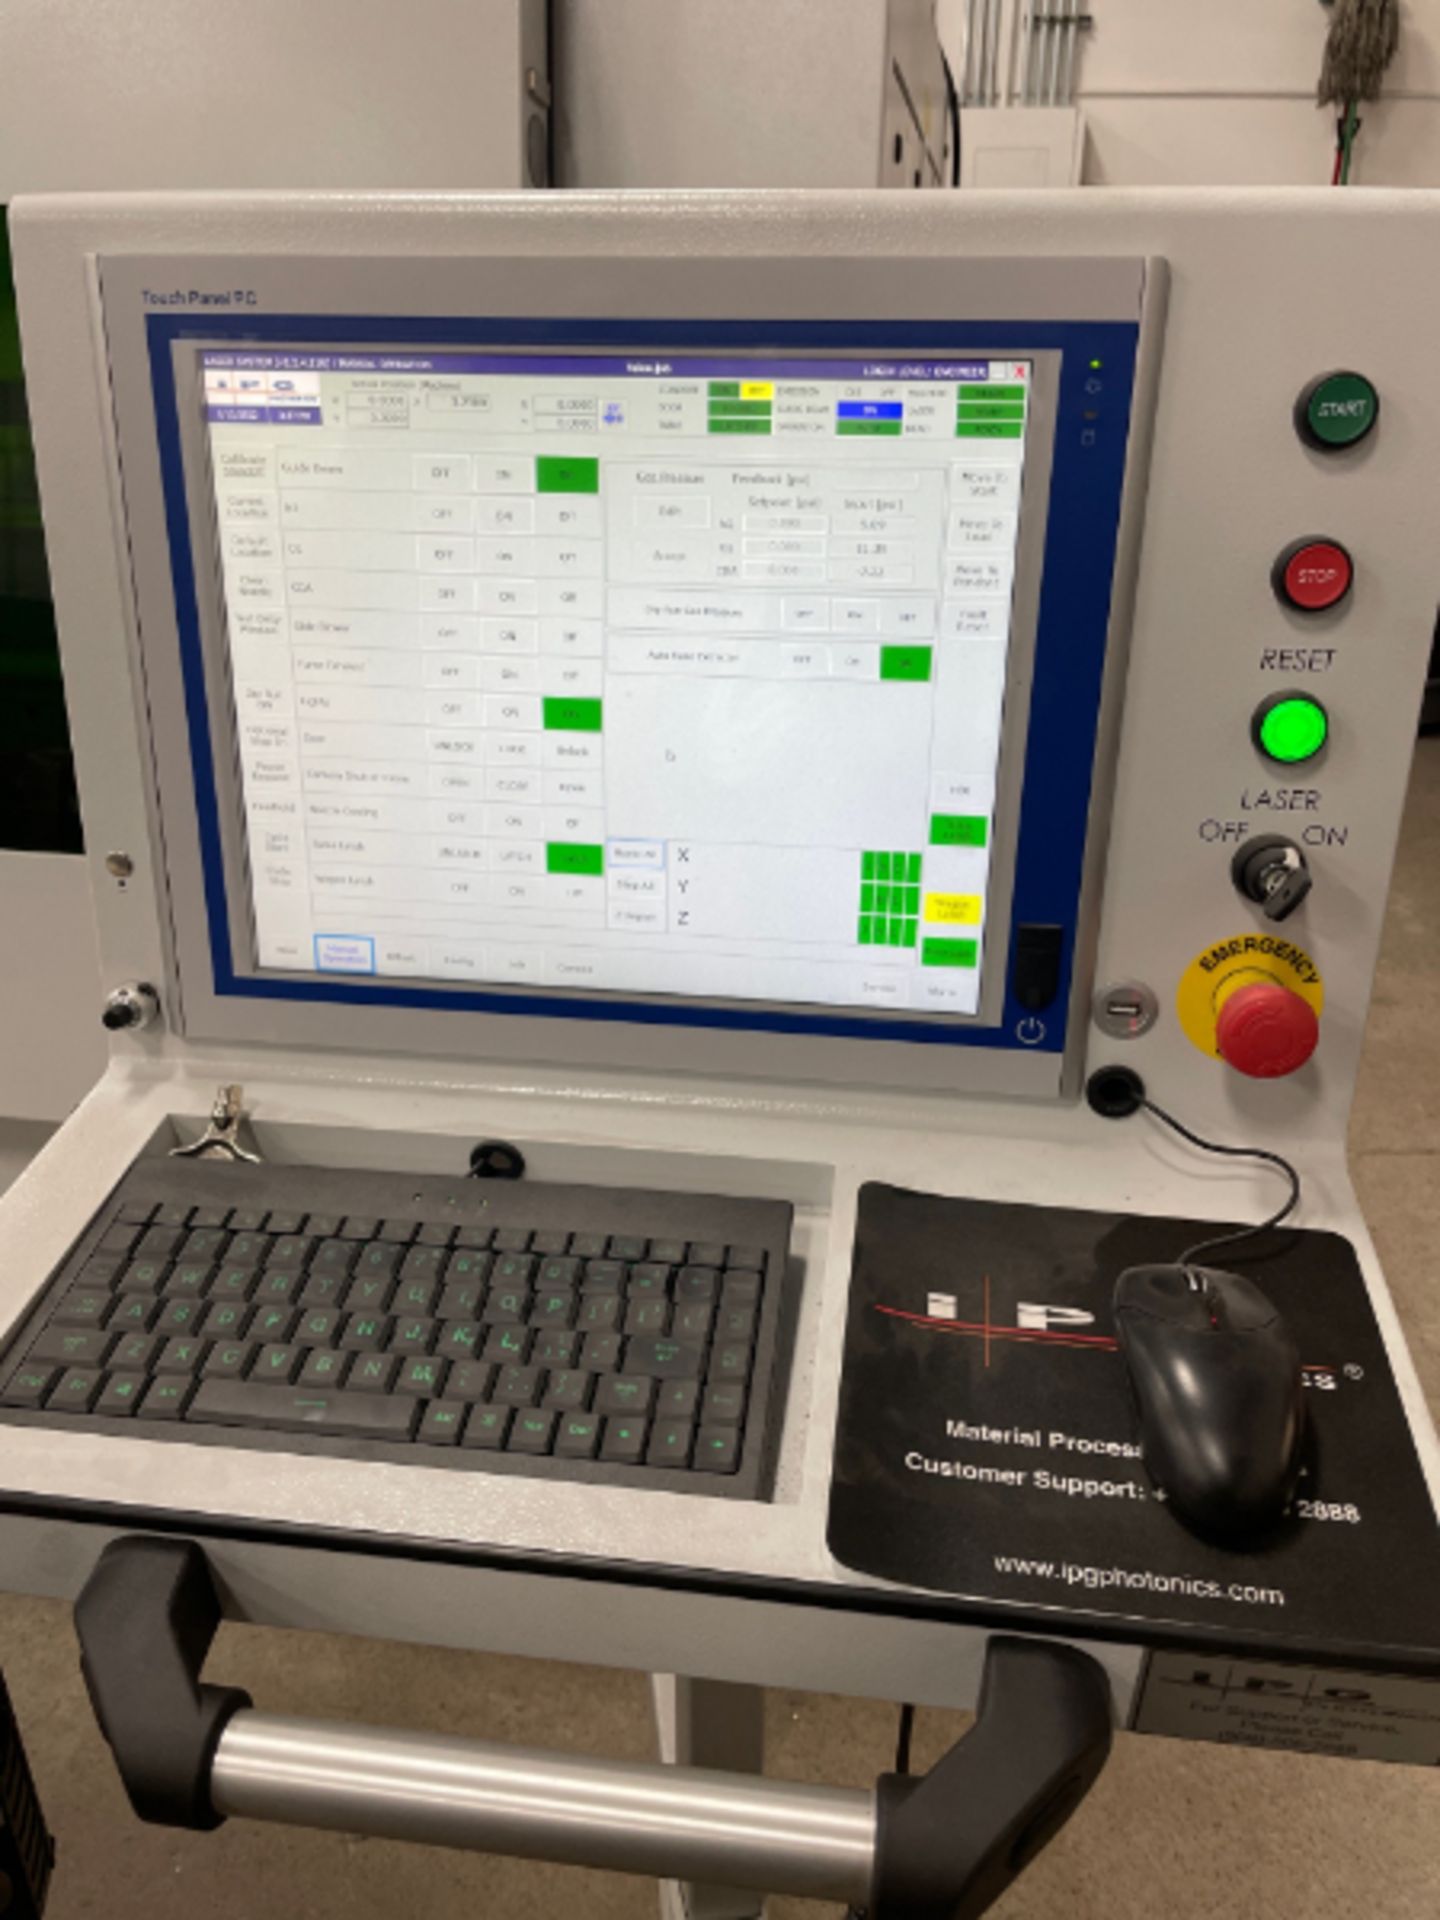 IPG YLR-3000/5000-20-HPP Photonics Fiber Laser *High Bid Subject to Confirmation by Secure Lender* - Image 4 of 13